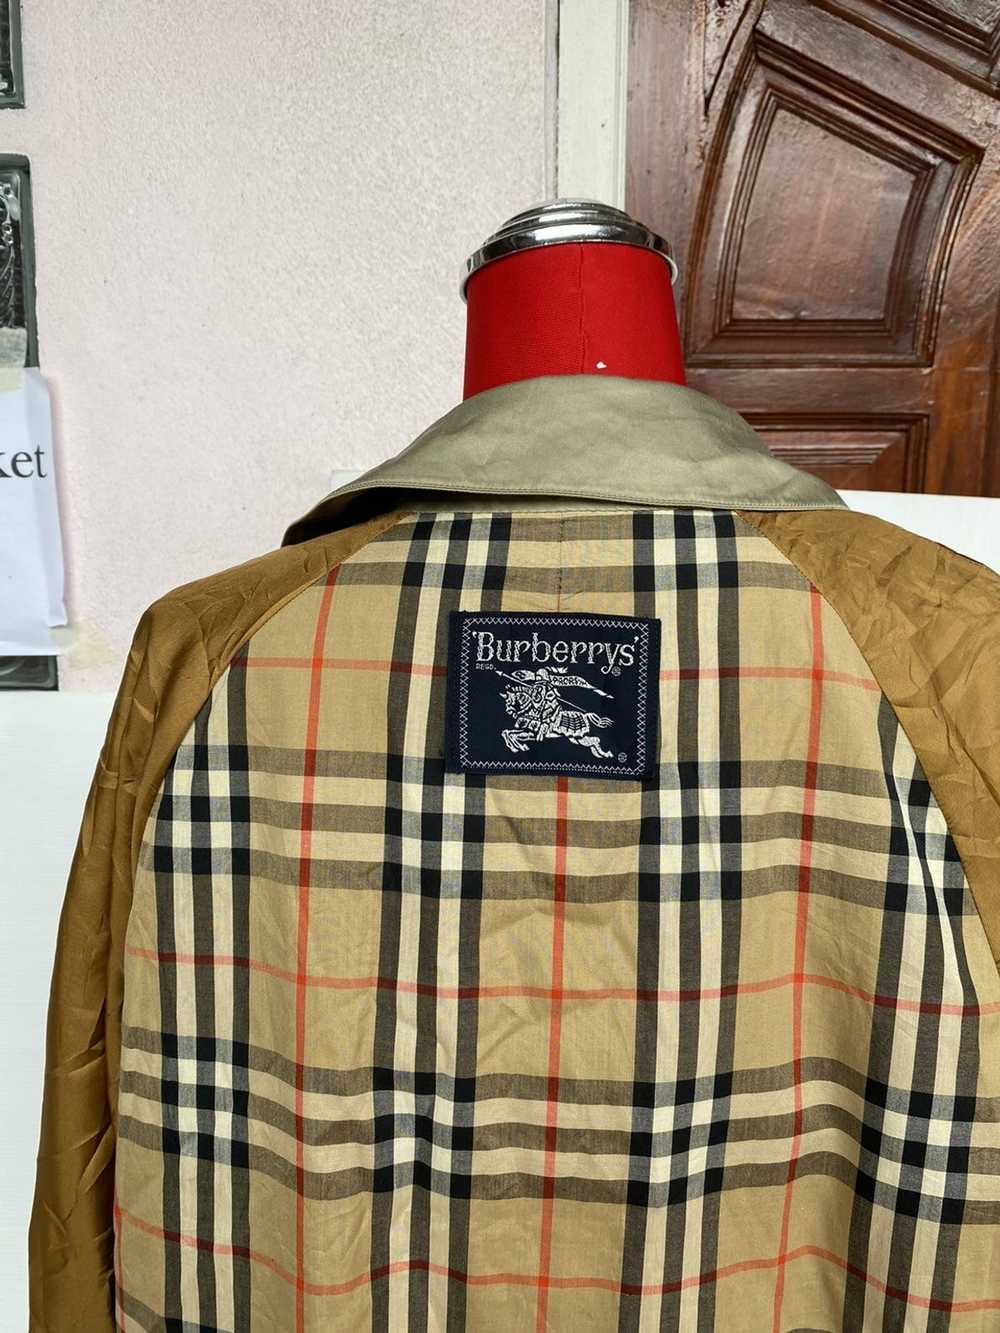 Burberry RARE VINTAGE BURBERRY TRENCH COAT - image 4